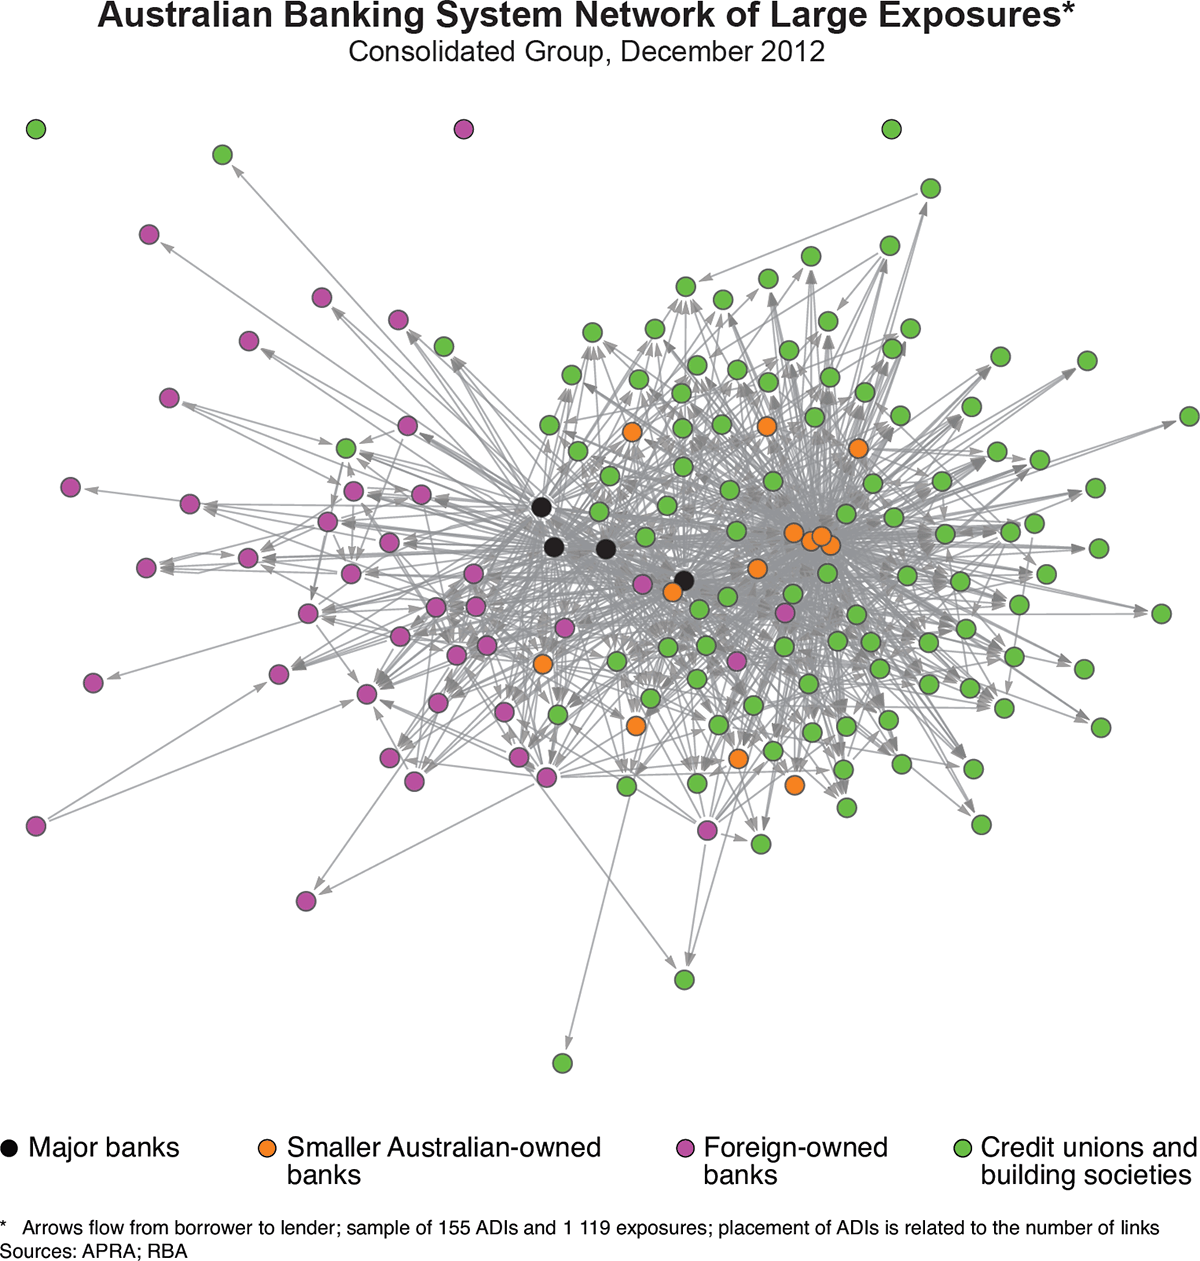 Graph 2: Australian Banking System Network of Large Exposures